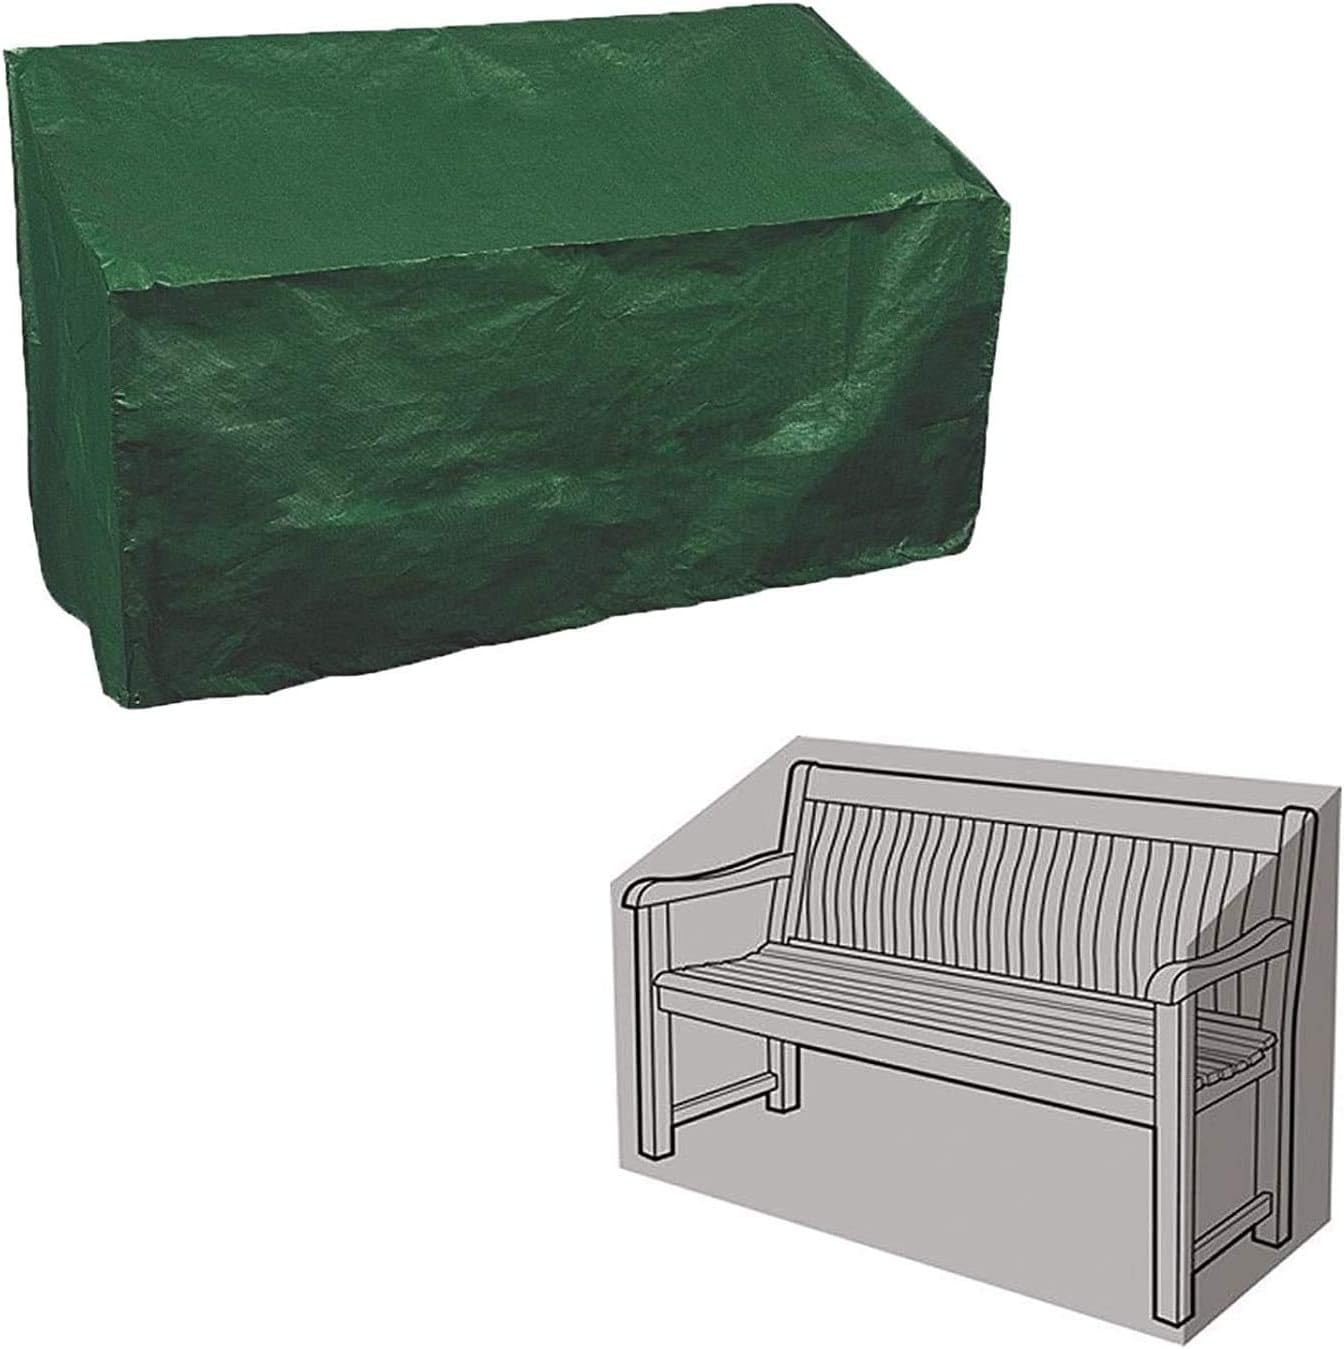 ADEPTNA Durable 3 Seater Garden Outdoor Bench Cover- Waterproof UV Protection - Ideal For All Year Round Use - Easily cleaned and tear resistant